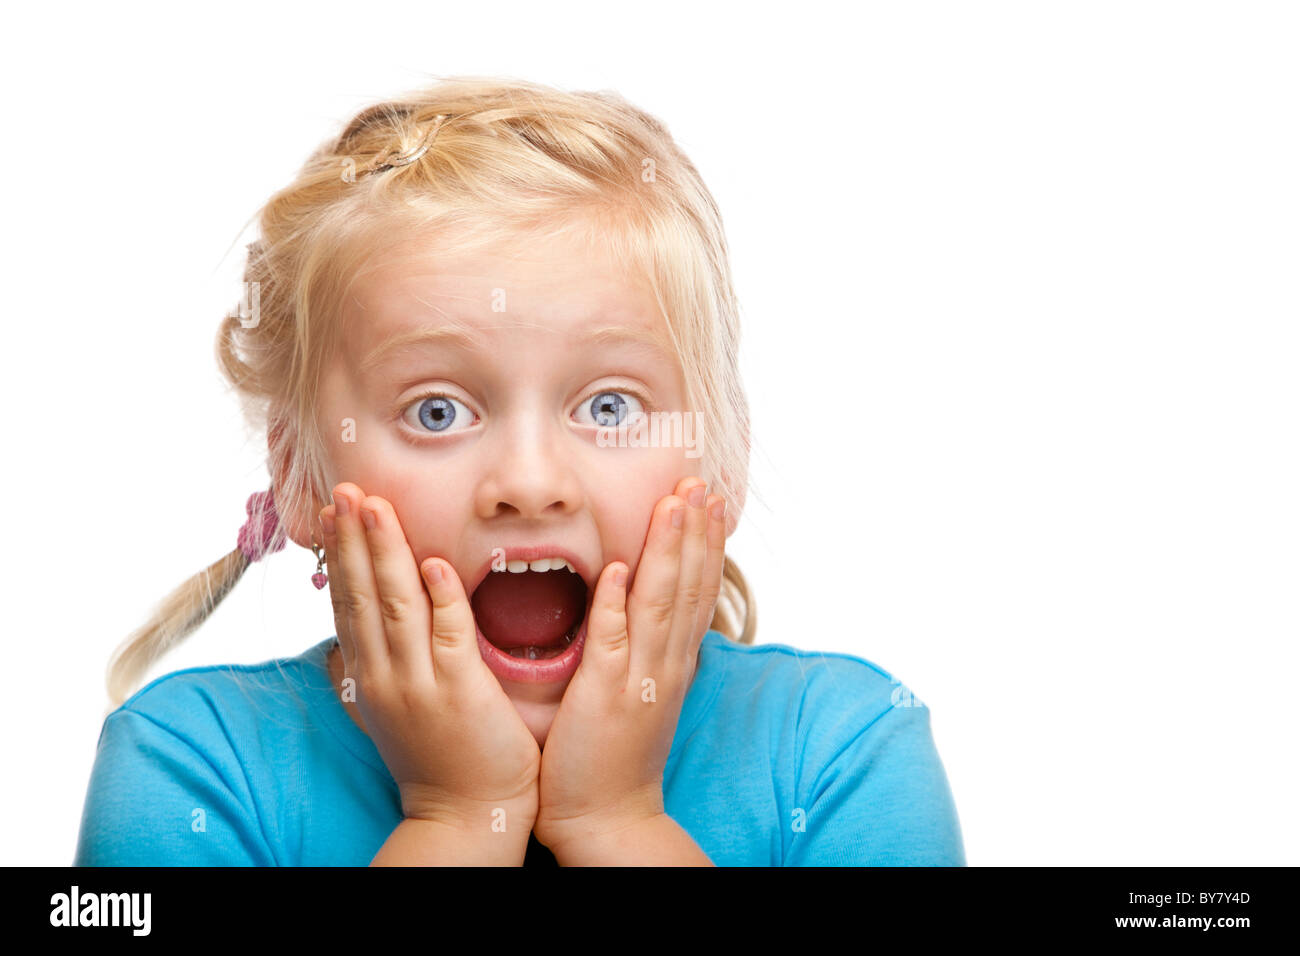 Young blond girl looks shocked at camera. Isolated on white background. Stock Photo